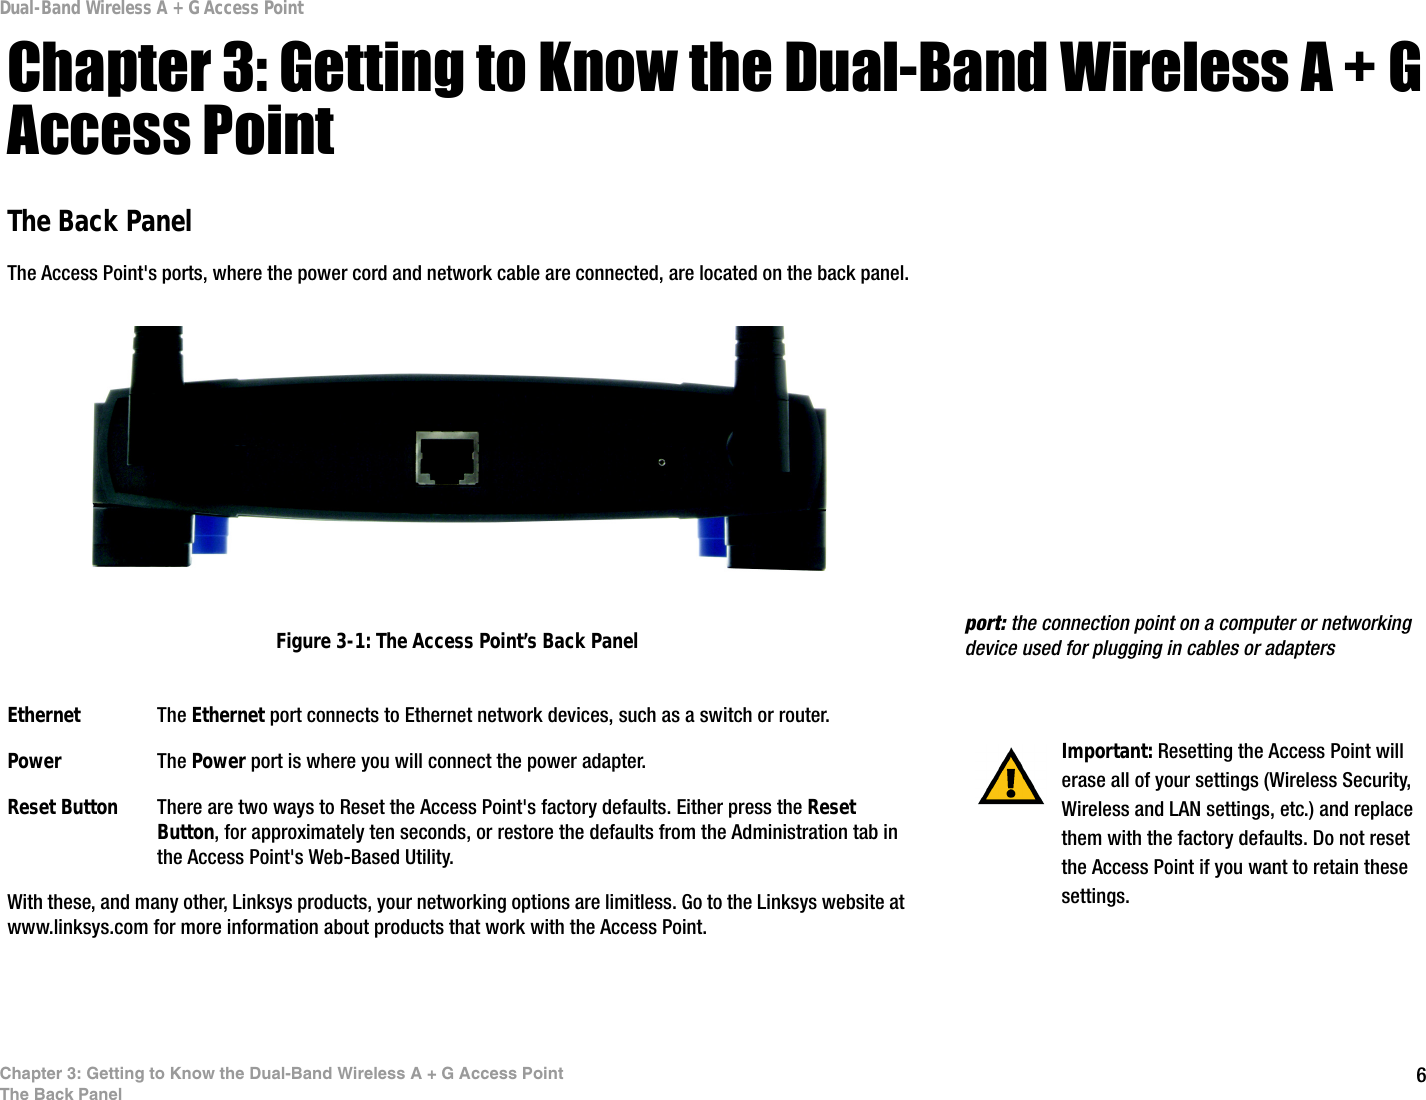 6Chapter 3: Getting to Know the Dual-Band Wireless A + G Access PointThe Back PanelDual-Band Wireless A + G Access PointChapter 3: Getting to Know the Dual-Band Wireless A + G Access PointThe Back PanelThe Access Point&apos;s ports, where the power cord and network cable are connected, are located on the back panel.Ethernet The Ethernet port connects to Ethernet network devices, such as a switch or router.Power The Power port is where you will connect the power adapter.Reset Button There are two ways to Reset the Access Point&apos;s factory defaults. Either press the Reset Button, for approximately ten seconds, or restore the defaults from the Administration tab in the Access Point&apos;s Web-Based Utility.With these, and many other, Linksys products, your networking options are limitless. Go to the Linksys website at www.linksys.com for more information about products that work with the Access Point.  Important: Resetting the Access Point will erase all of your settings (Wireless Security, Wireless and LAN settings, etc.) and replace them with the factory defaults. Do not reset the Access Point if you want to retain these settings.Figure 3-1: The Access Point’s Back Panel port: the connection point on a computer or networking device used for plugging in cables or adapters